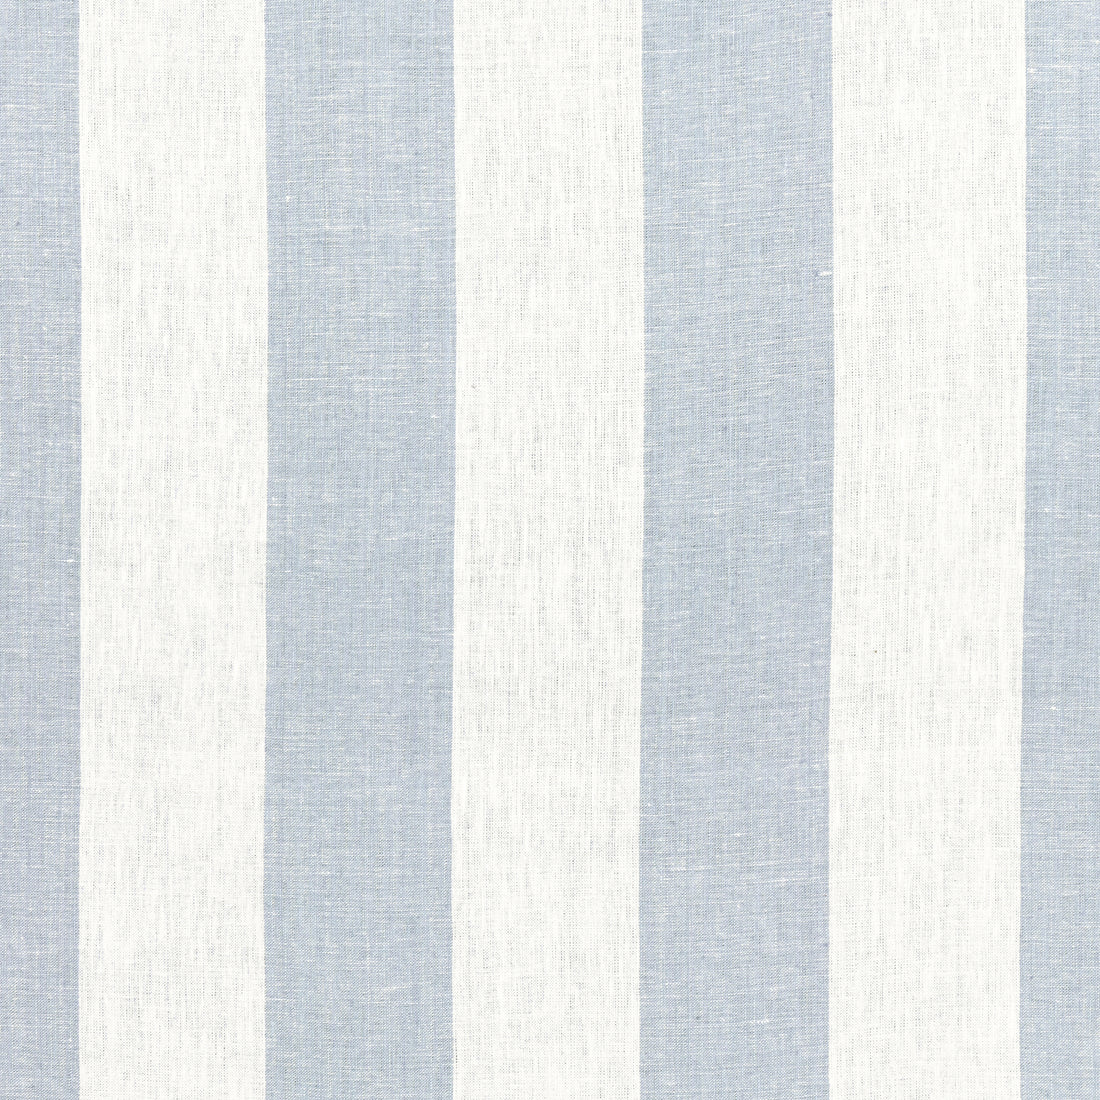 Stockwell Stripe fabric in soft blue color - pattern number AW23162 - by Anna French in the Willow Tree collection